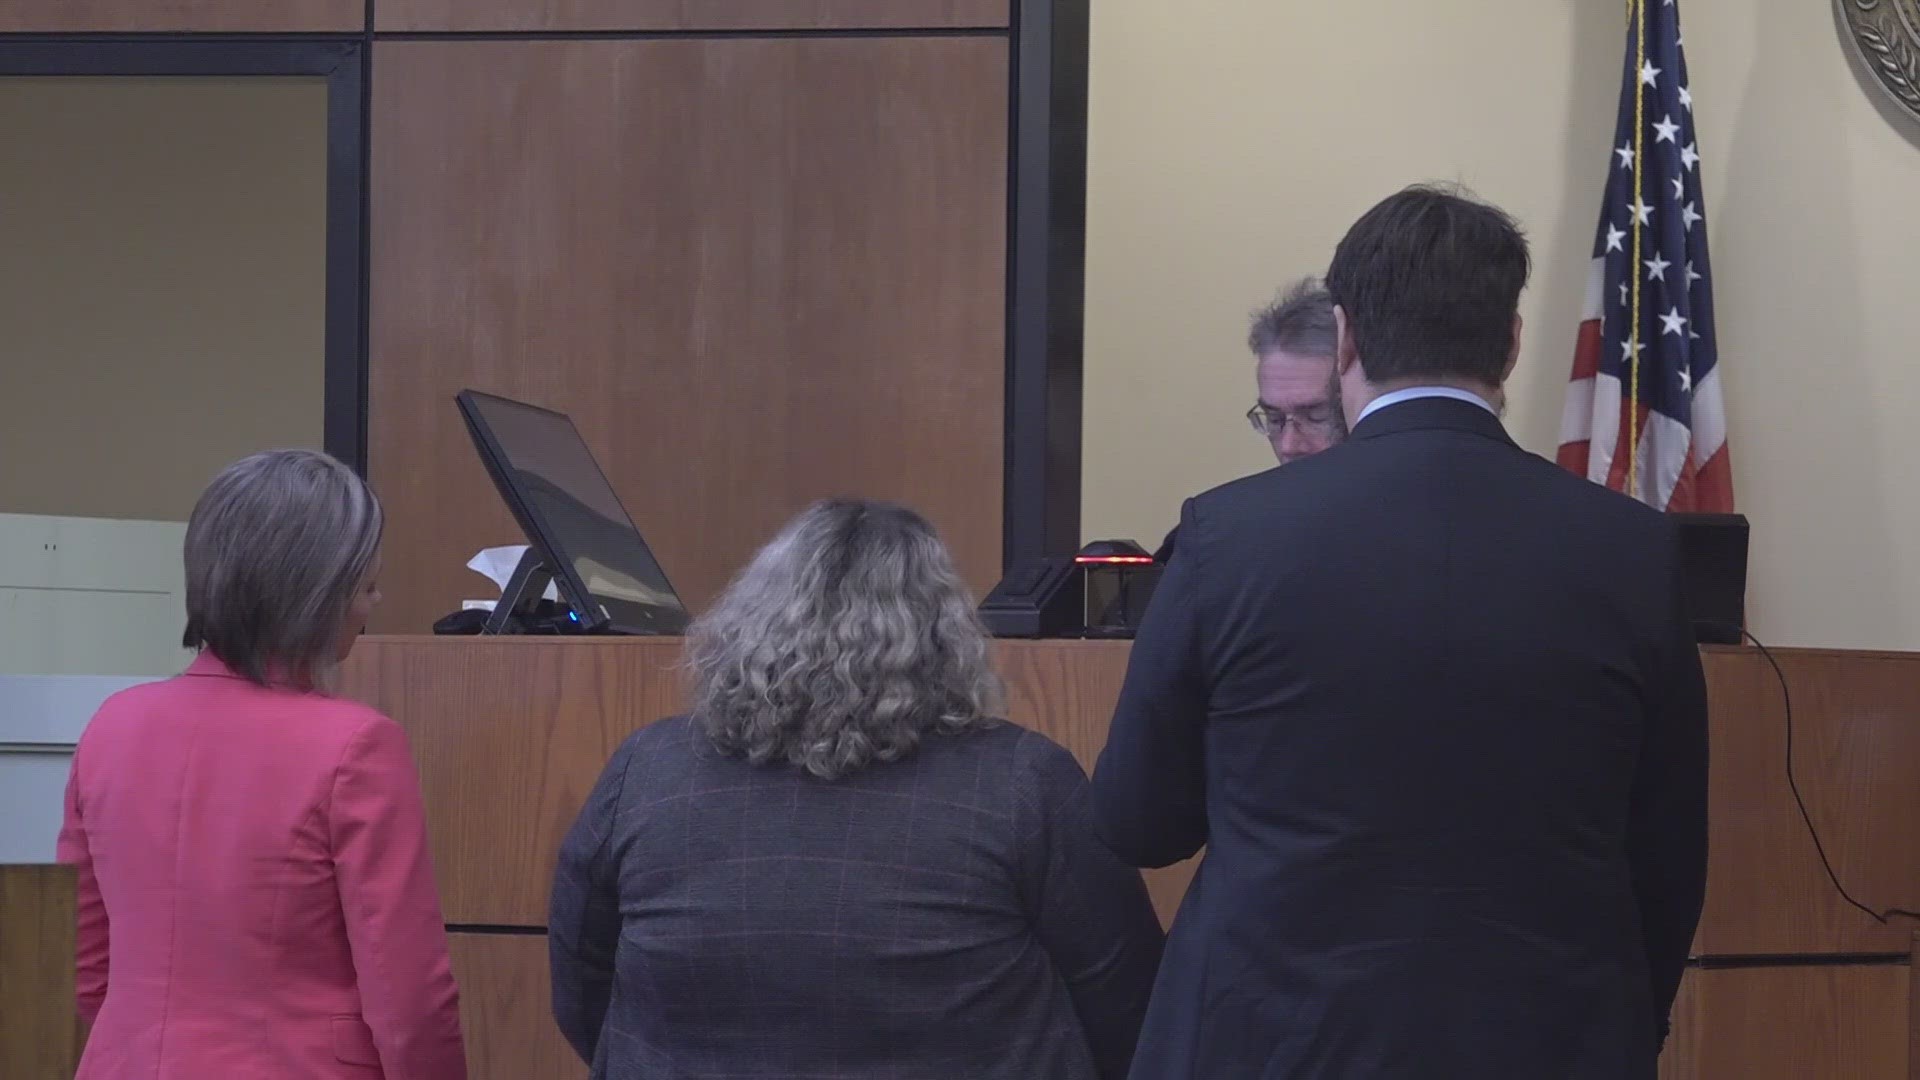 Erica Lawson was expected to make one of her first appearances in a Bell County courtroom on Monday. Instead, her lawyers asked for an extension.